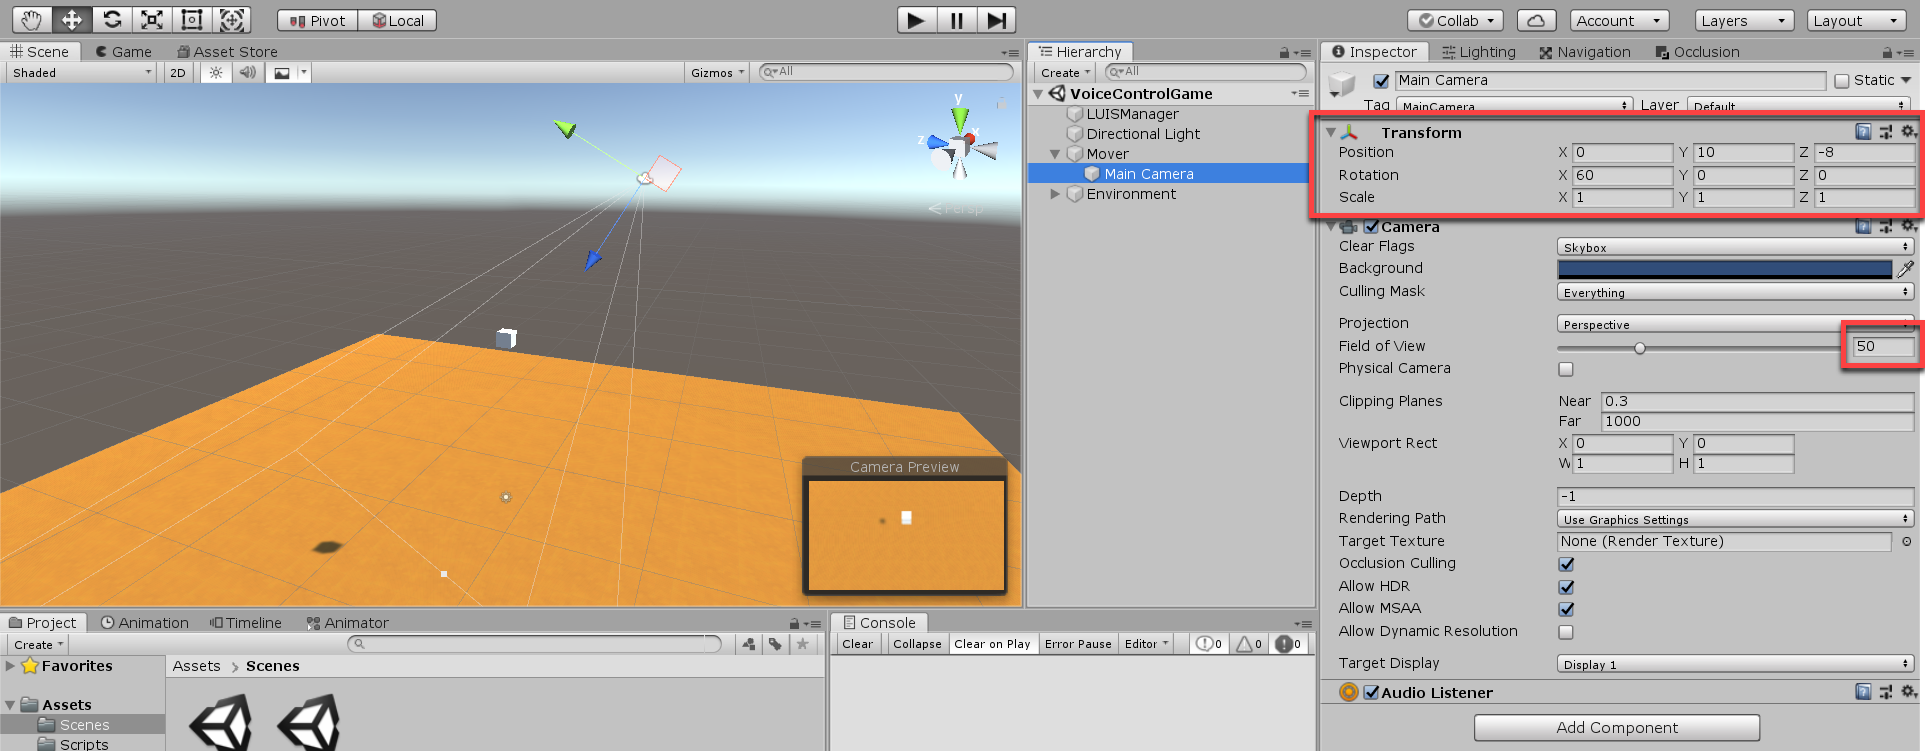 Camera options in the Unity Inspector